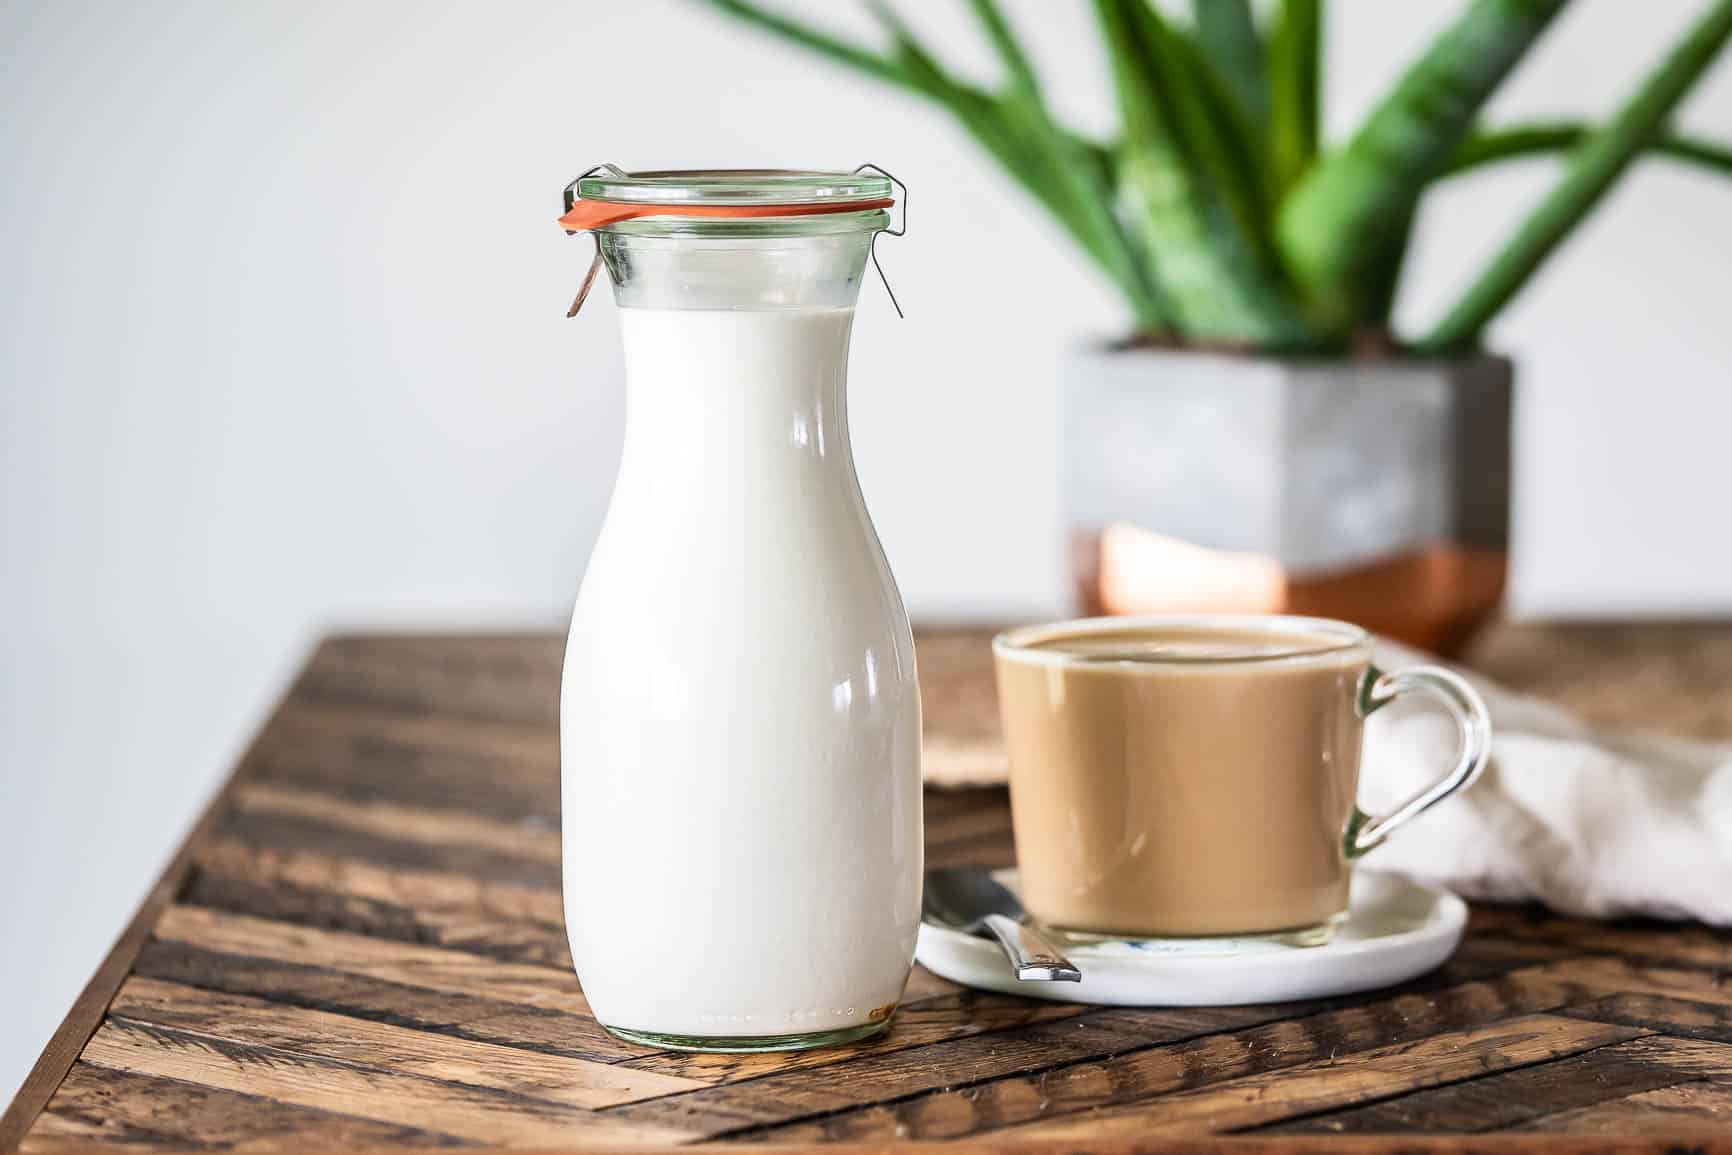 If you are Keto or Low-Carb and miss a sweet vanilla coffee creamer, don't worry! I've got you covered! With only 5 net carbs per serving, you will enjoy your morning cup of coffee more than ever with my Keto Low-Carb Vanilla Coffee Creamer.